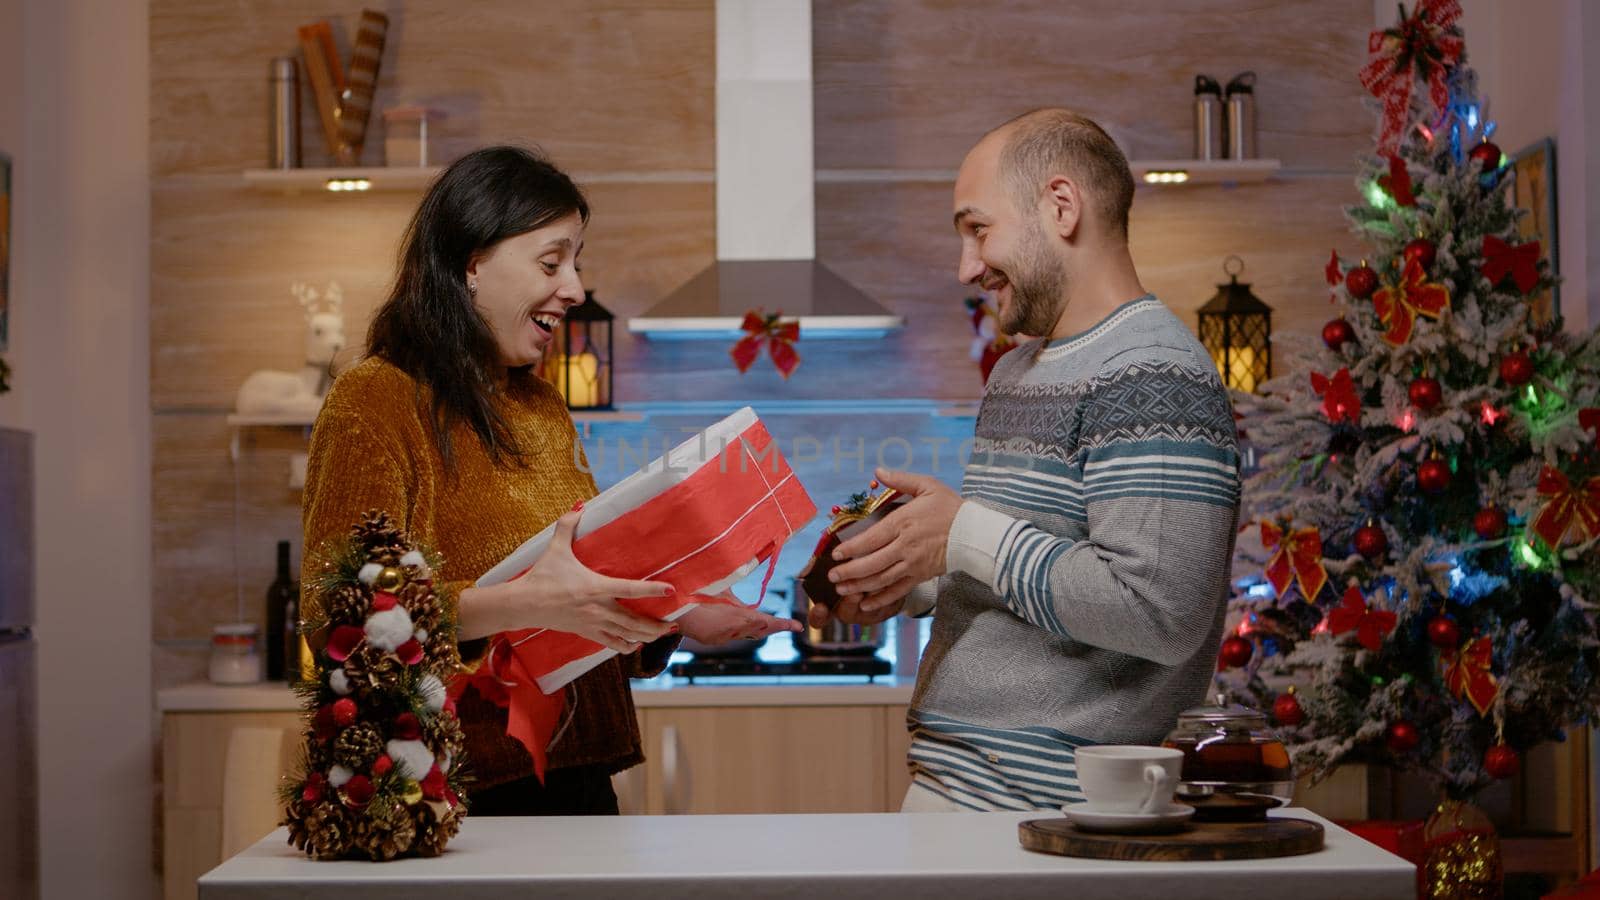 Cheerful couple exchanging presents on christmas eve day for seasonal celebration. Festive people giving gifts to each other celebrating holiday festivity in decorated kitchen.